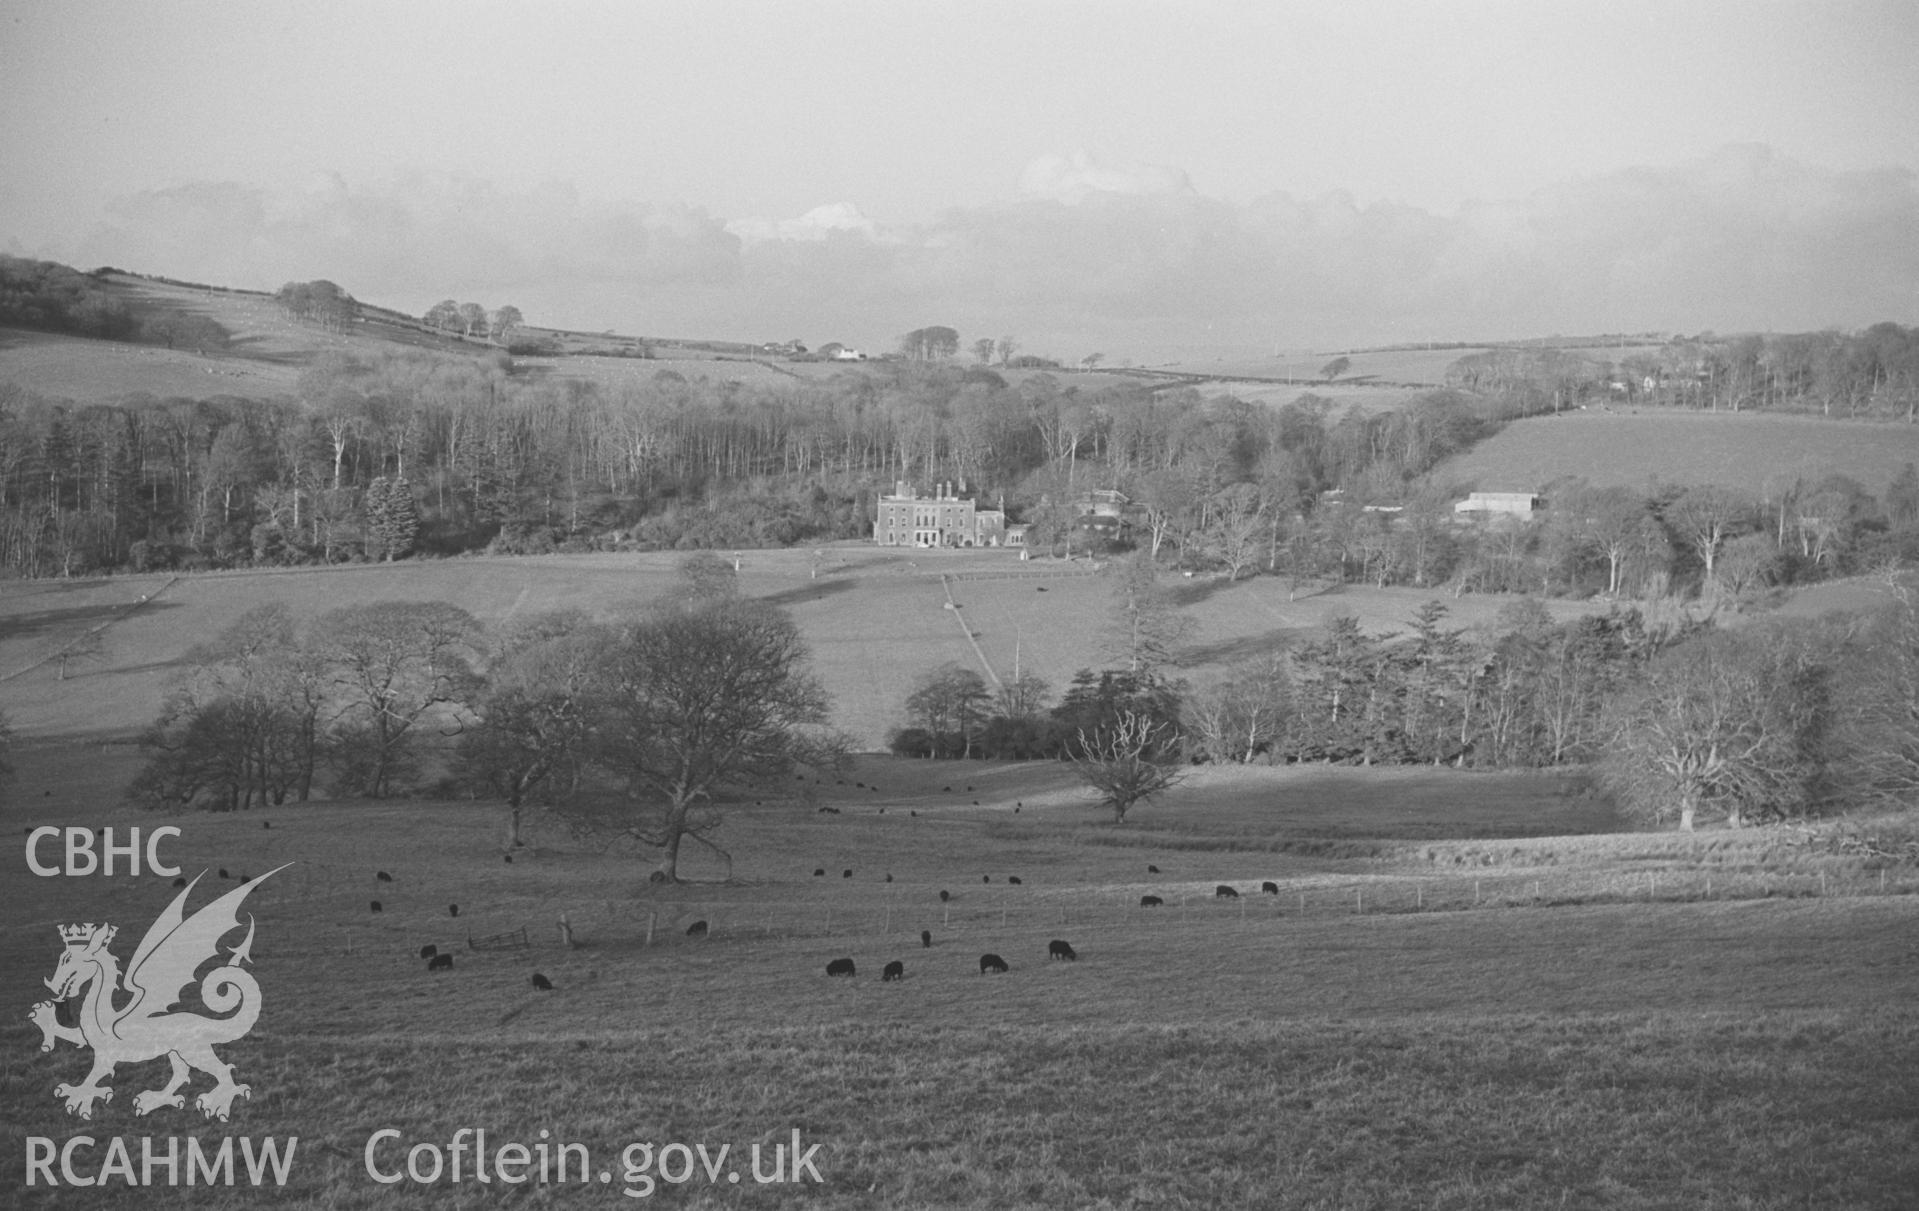 Digital copy of a black and white negative showing view of Nanteos mansion with black sheep. Photographed by Arthur O. Chater on 1st January 1967 looking north from the New Cross road 150m east of Pont Nant-y-Garlleg, Grid Reference SN 6200 7789.